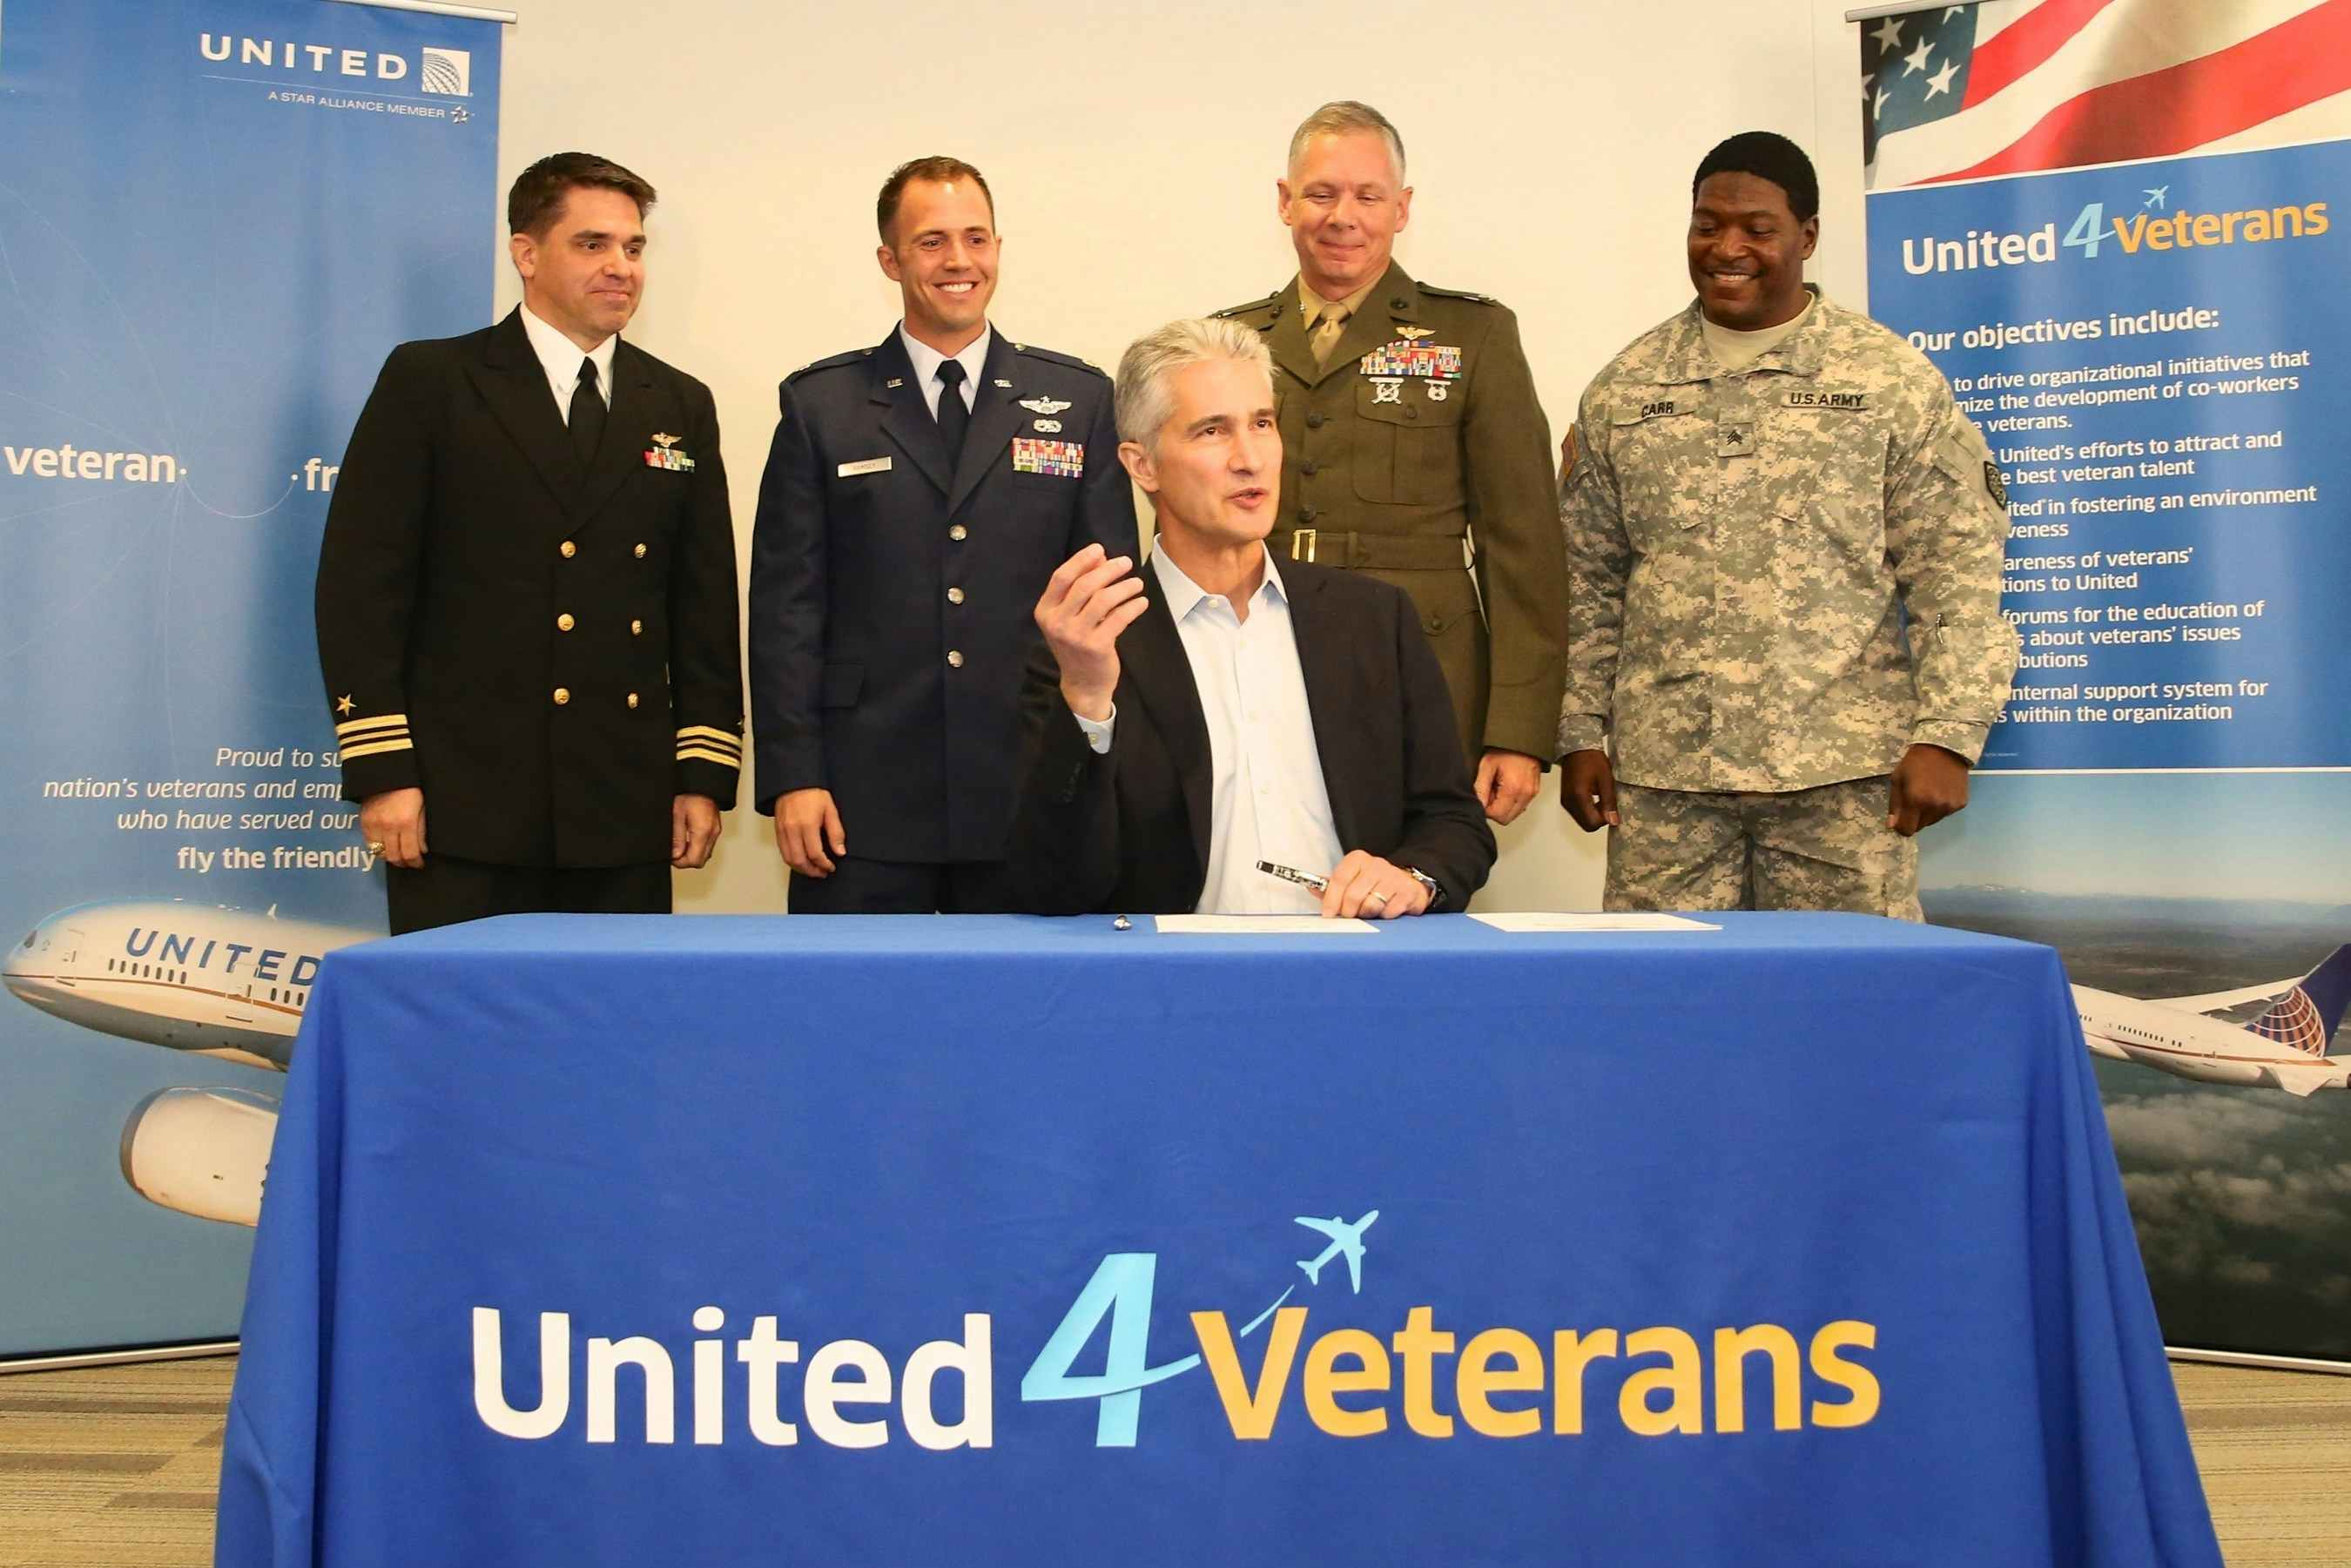 United Airlines with military veterans